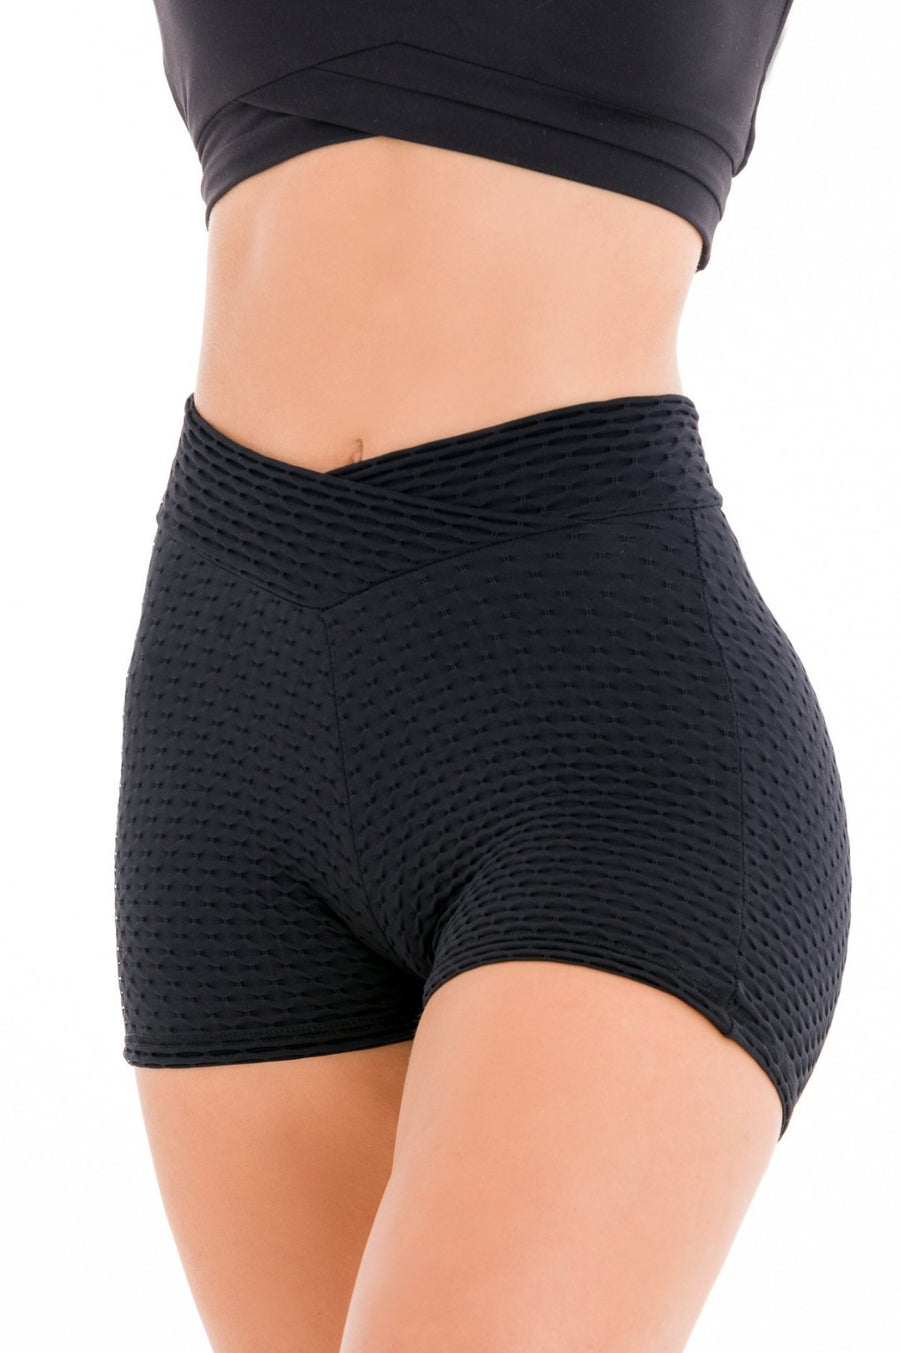 LIFTED - BOOTY SHORTS - JET BLACK - StrongByMinx